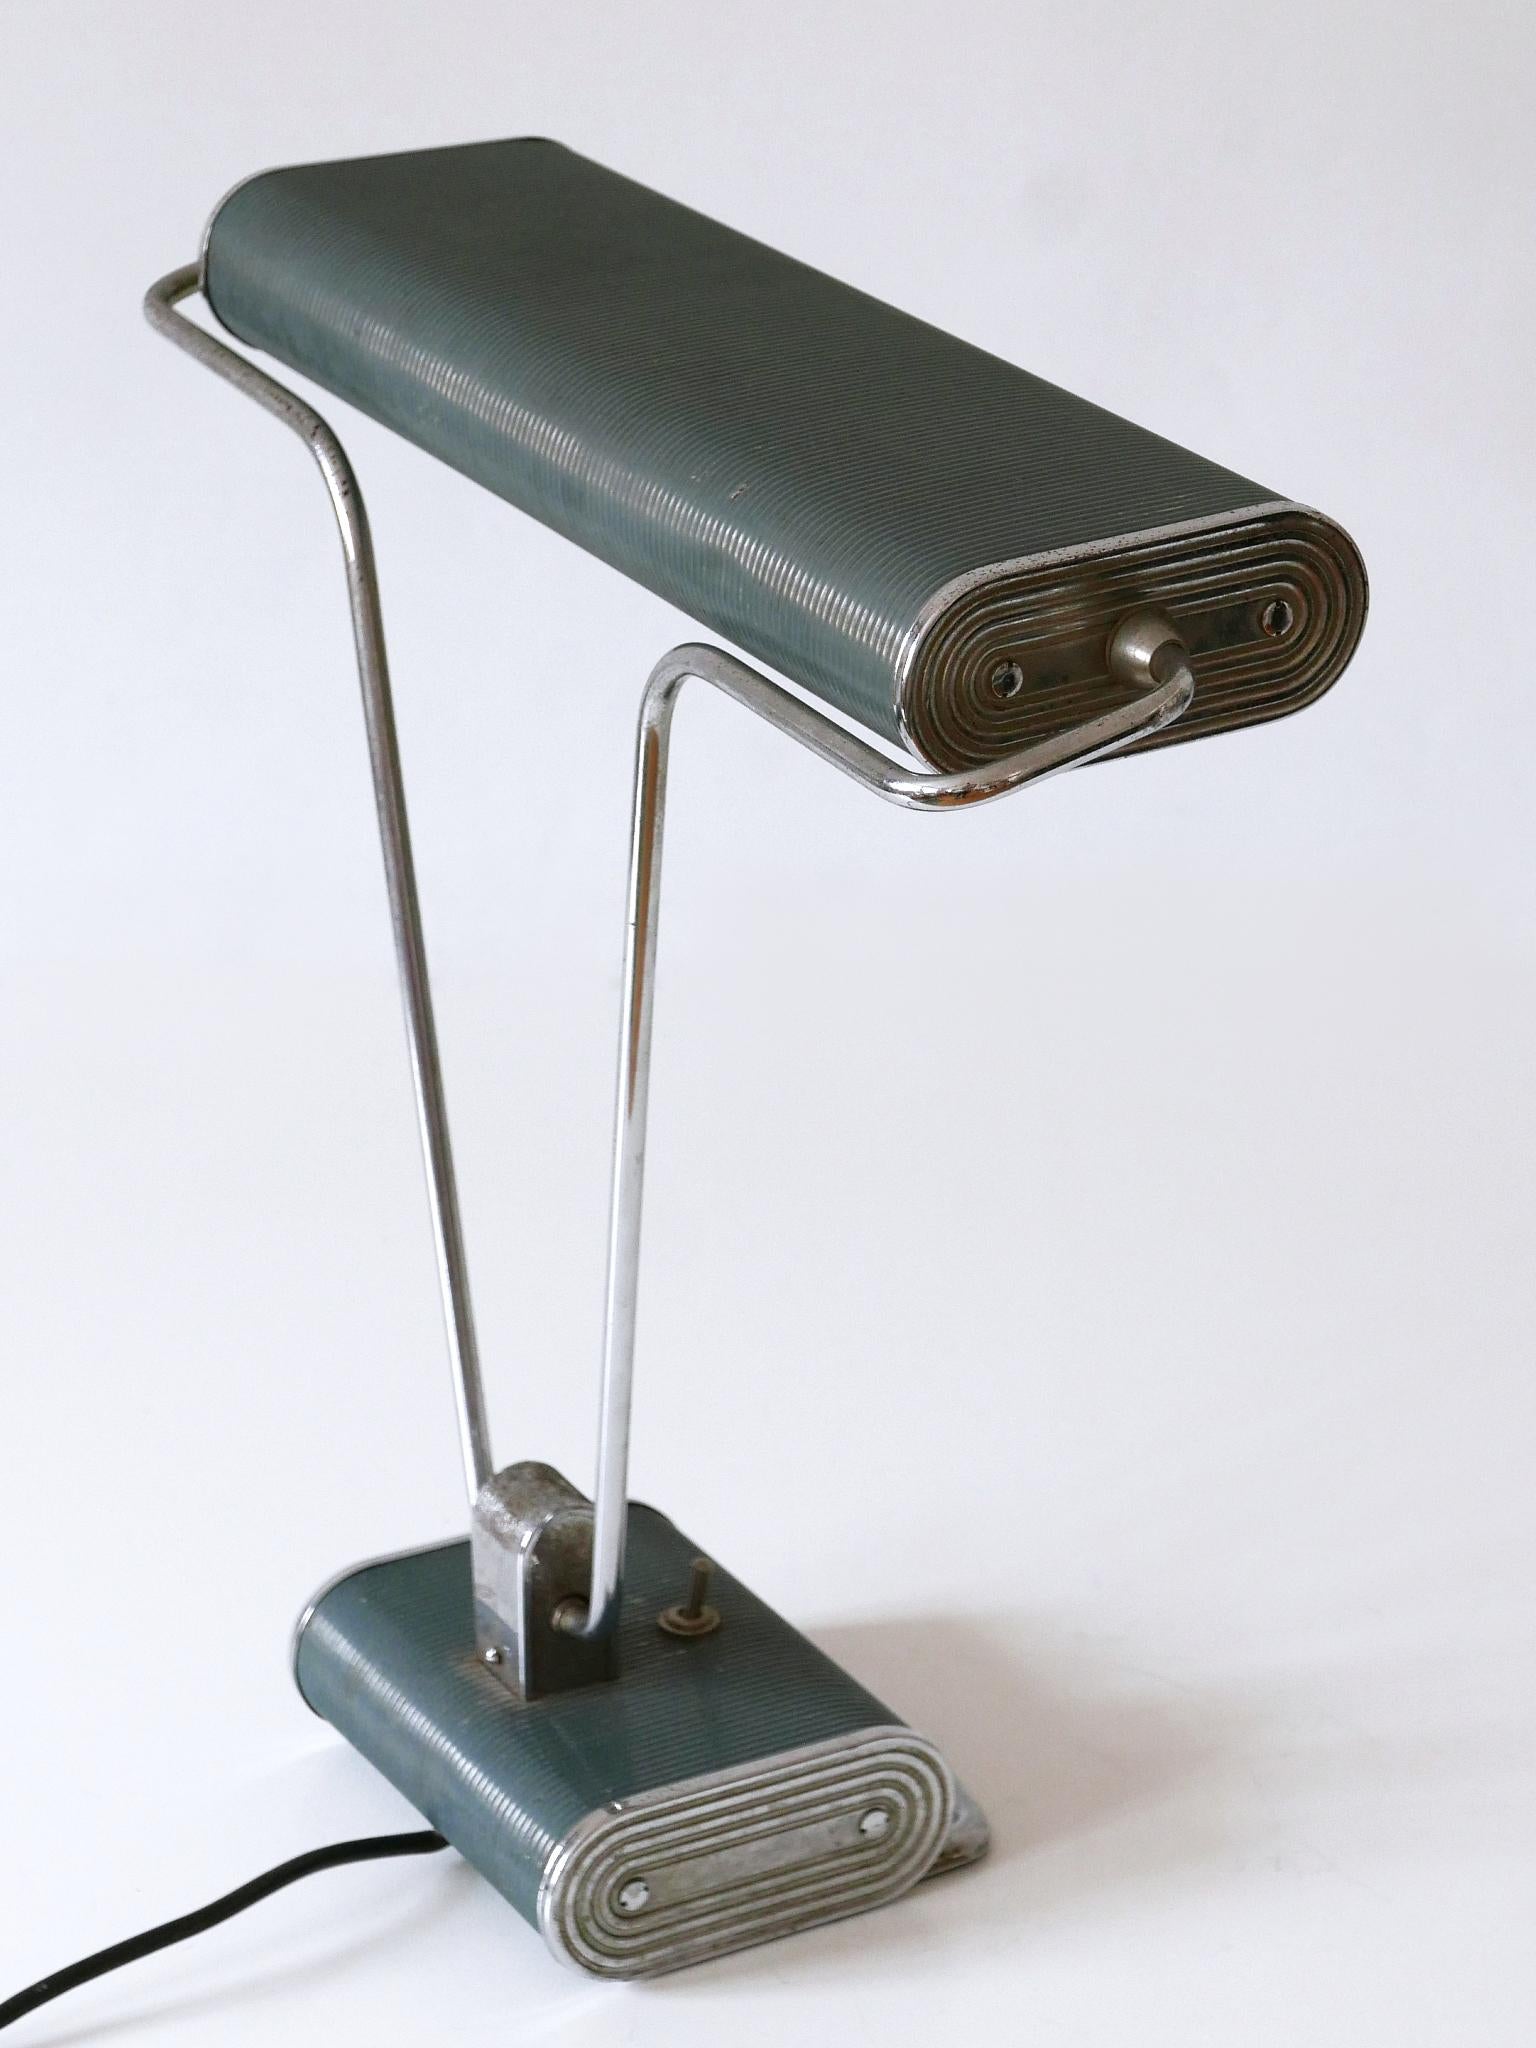 Art Deco Table Lamp or Desk Light 'No 71' by André Mounique for Jumo 1930s For Sale 2